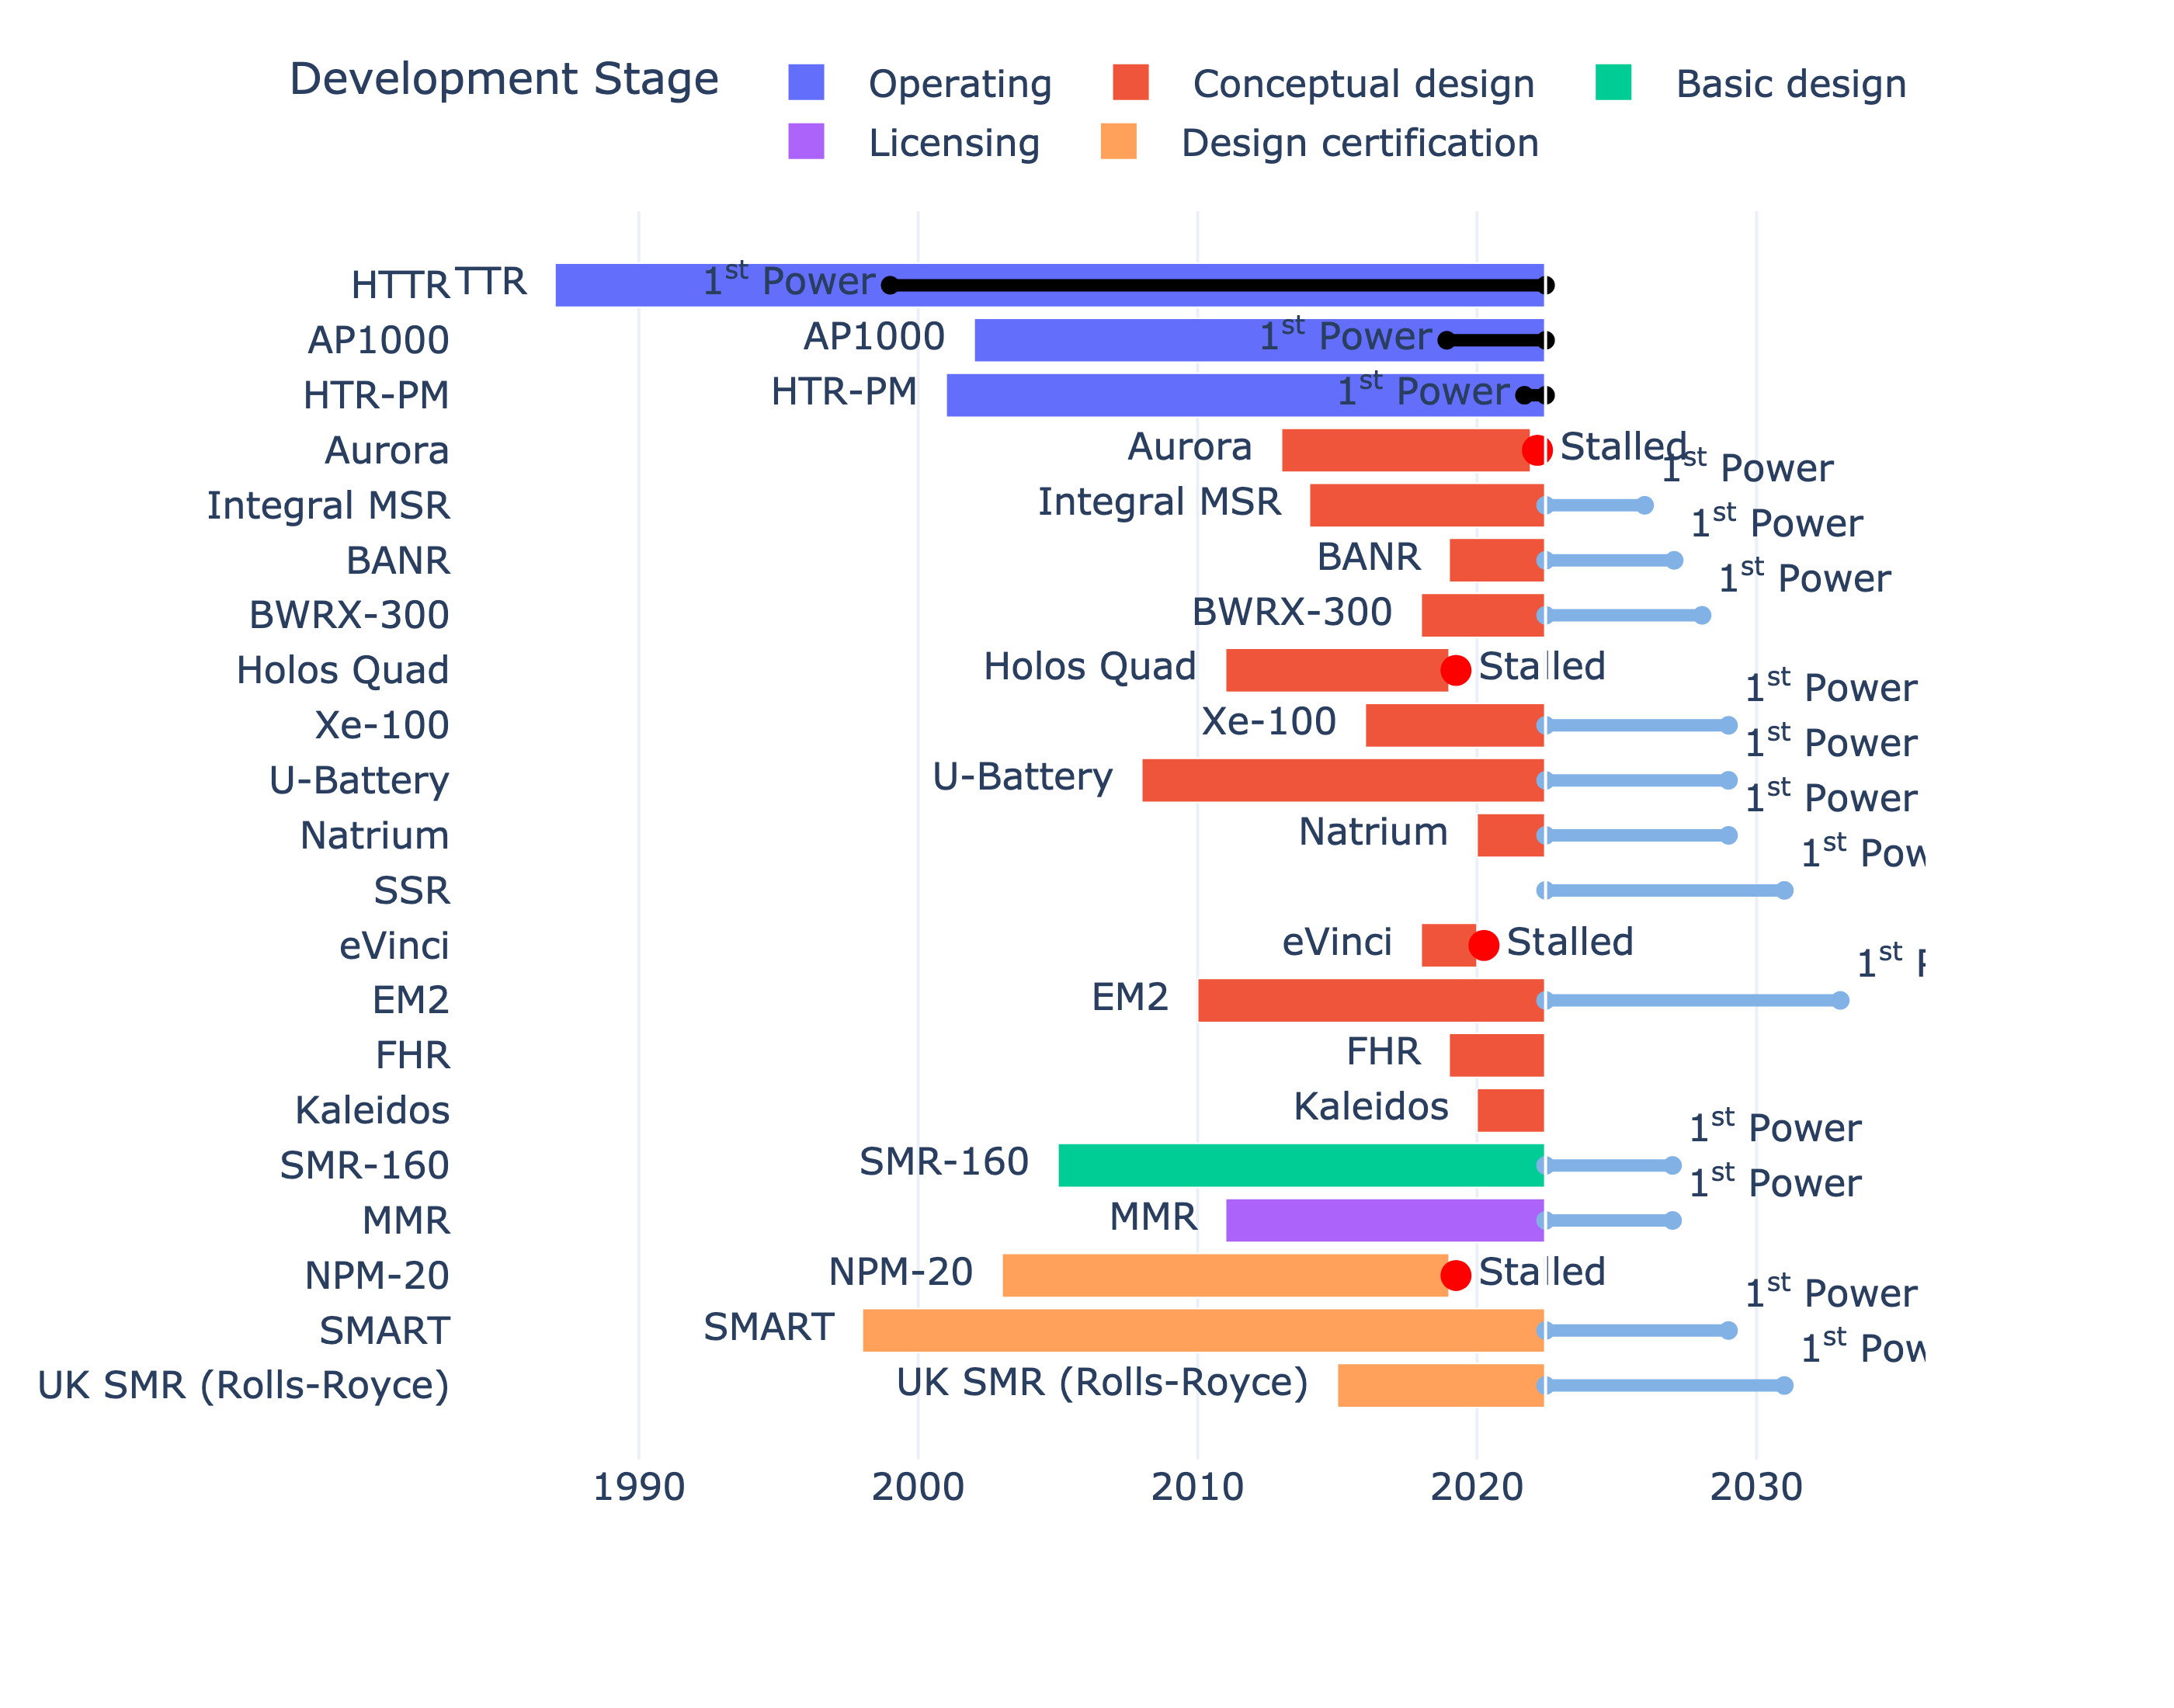 1. Reactor design development and implementation timelines based on publicly available information 
such as press releases, interviews, and regulatory announcements. The top three advanced reactors are in 
operation at one or multiple sites.